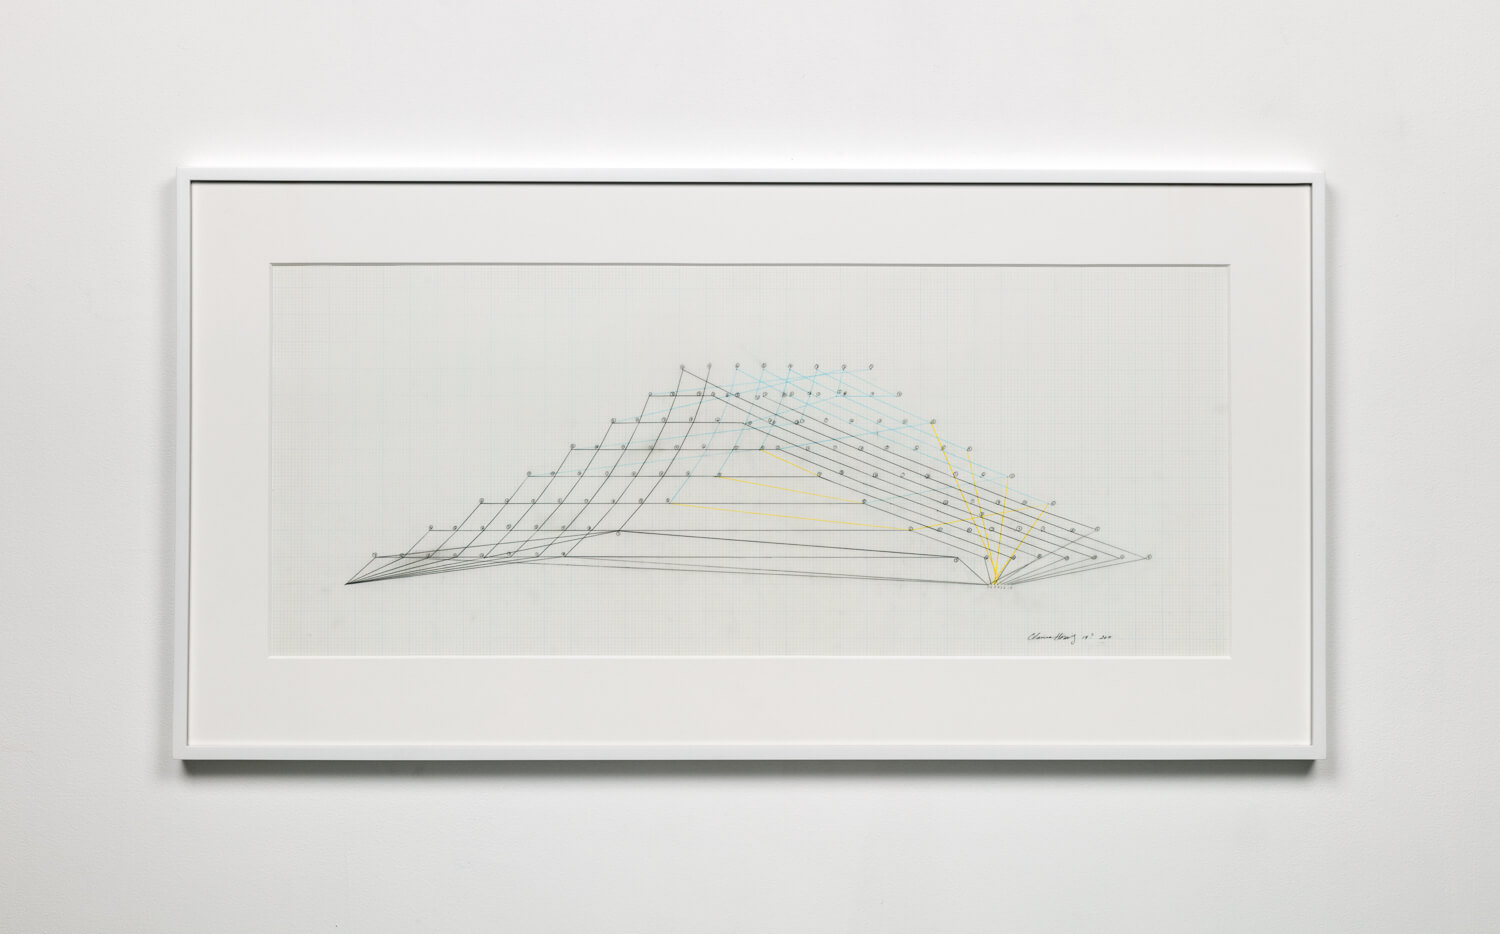 Horwitz, Structure for Slices, 1978-2010 (CH 78.001)(#340)